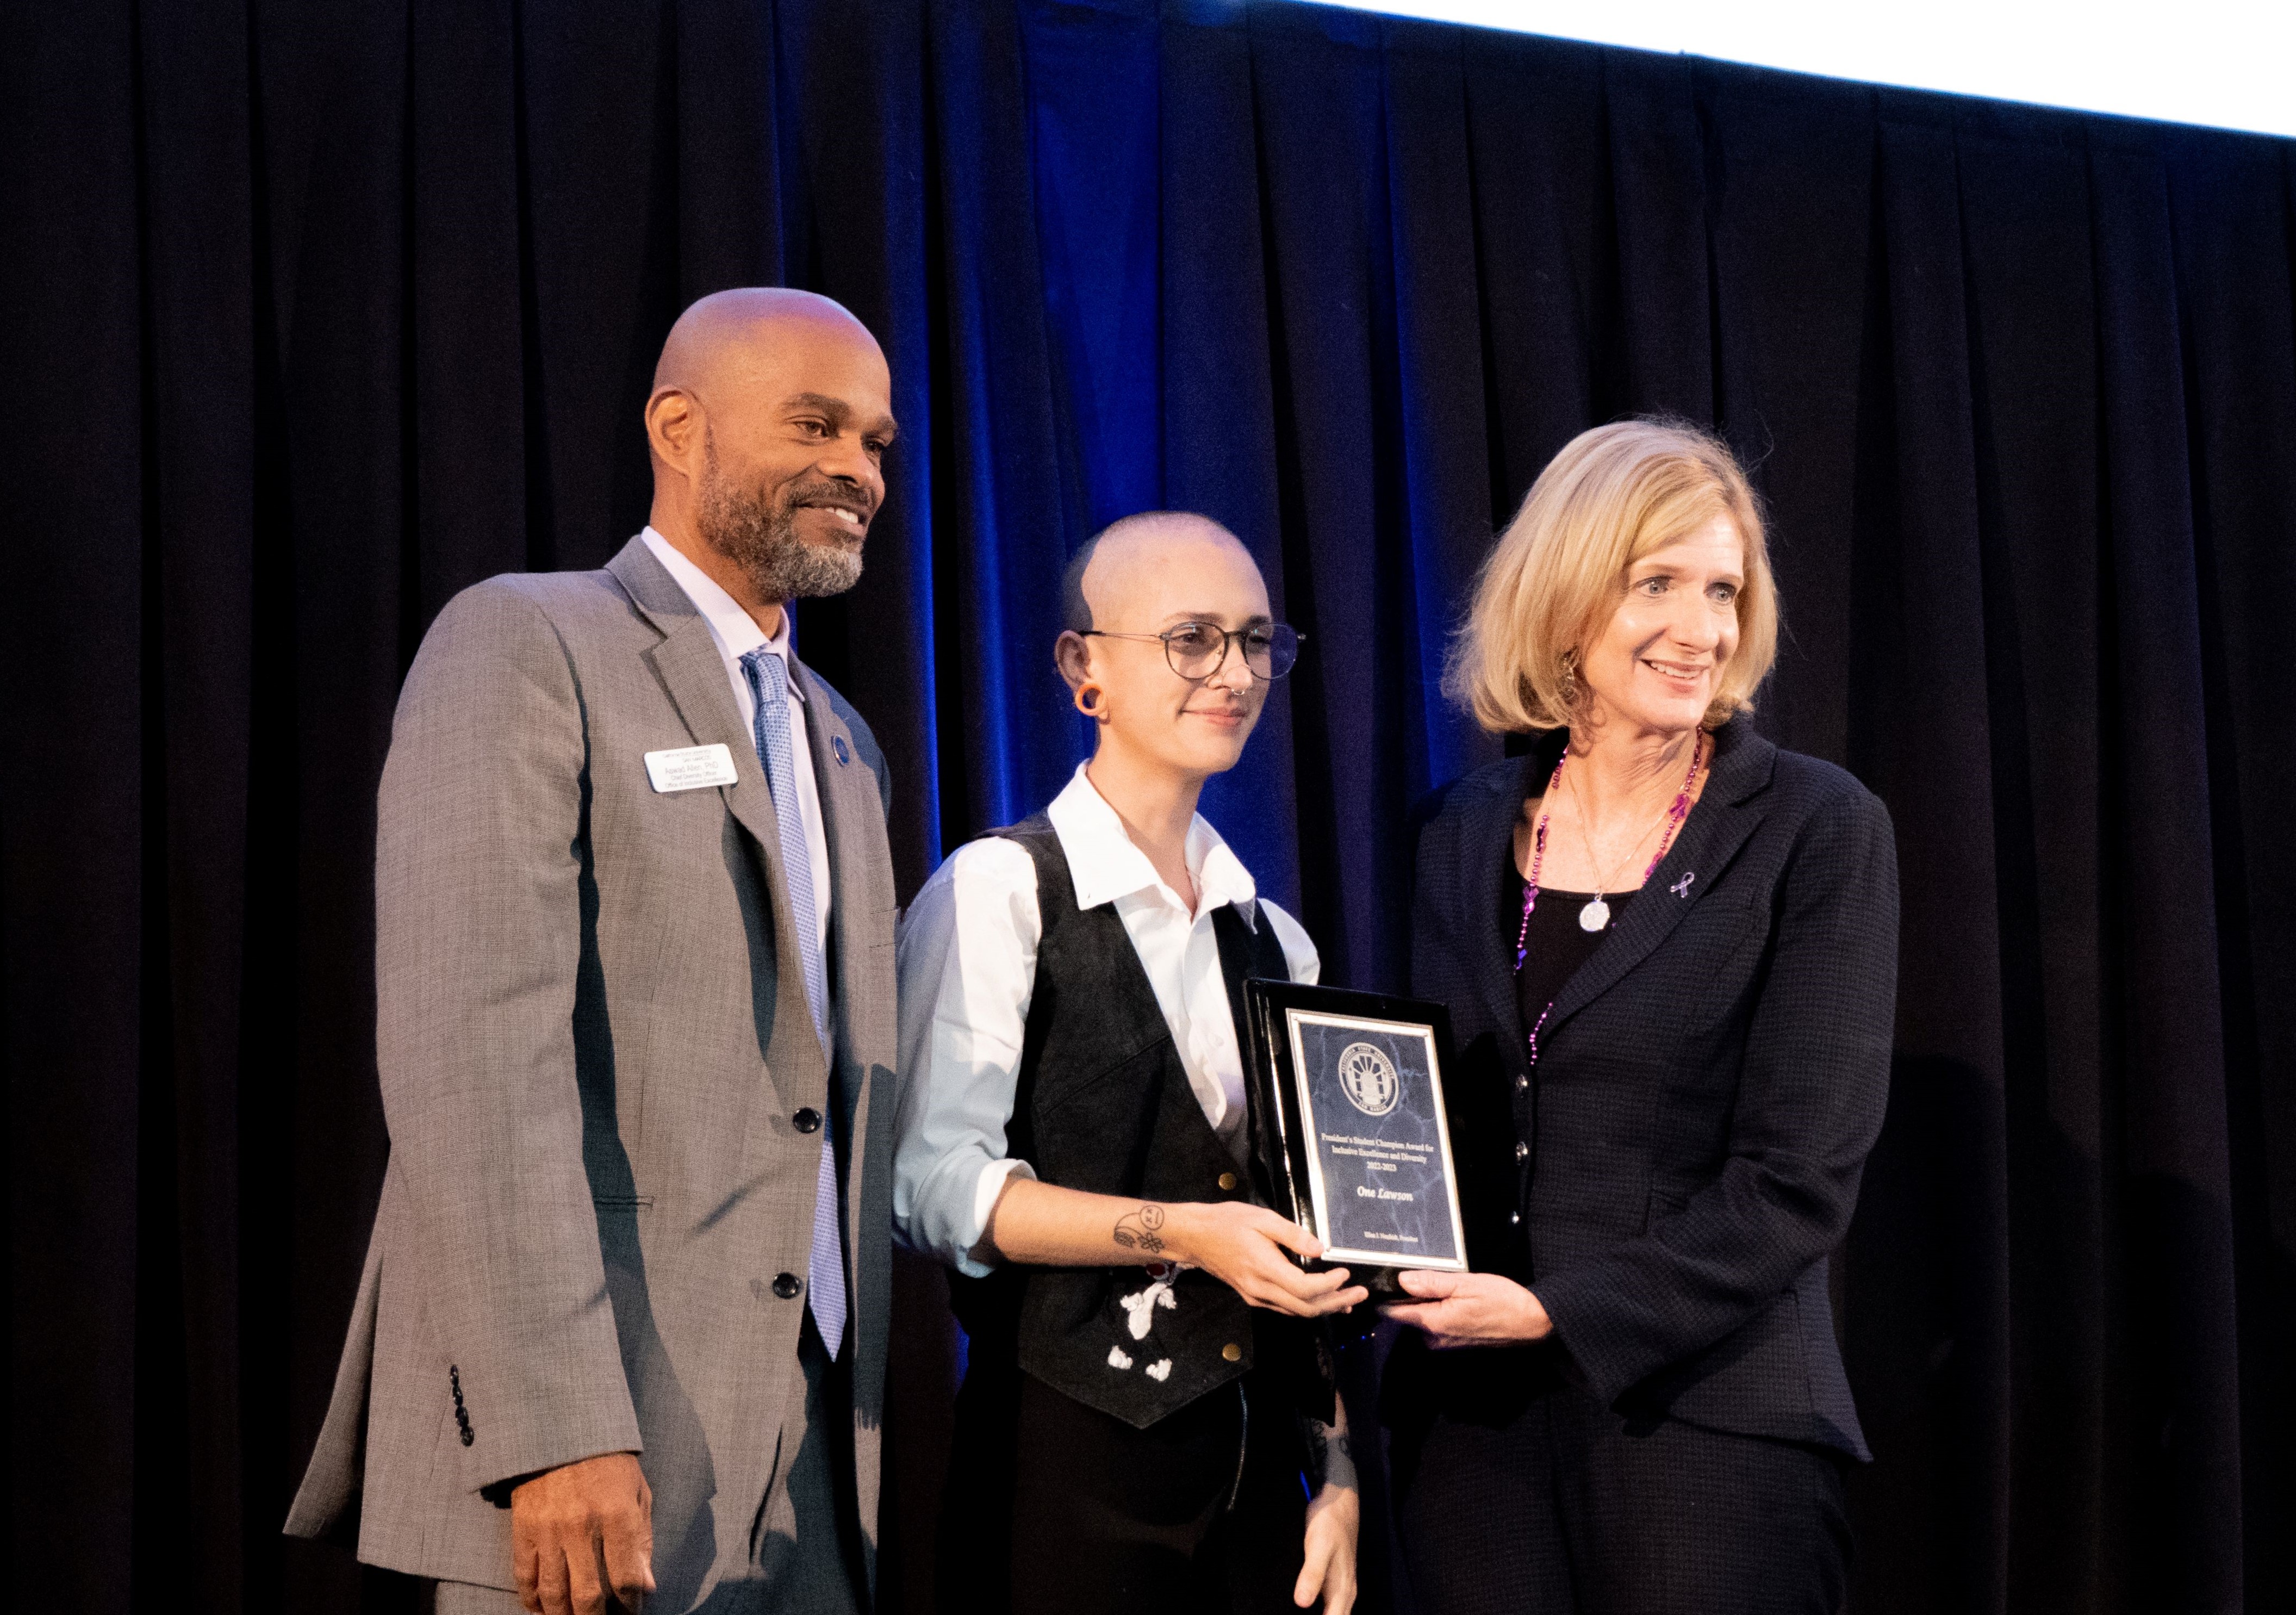 Chief Diversity Officer Aswad Allen pictued on left, One Reks, Student Campion Awardeepictured in the middle and President Ellen Neufelt pictured on the right